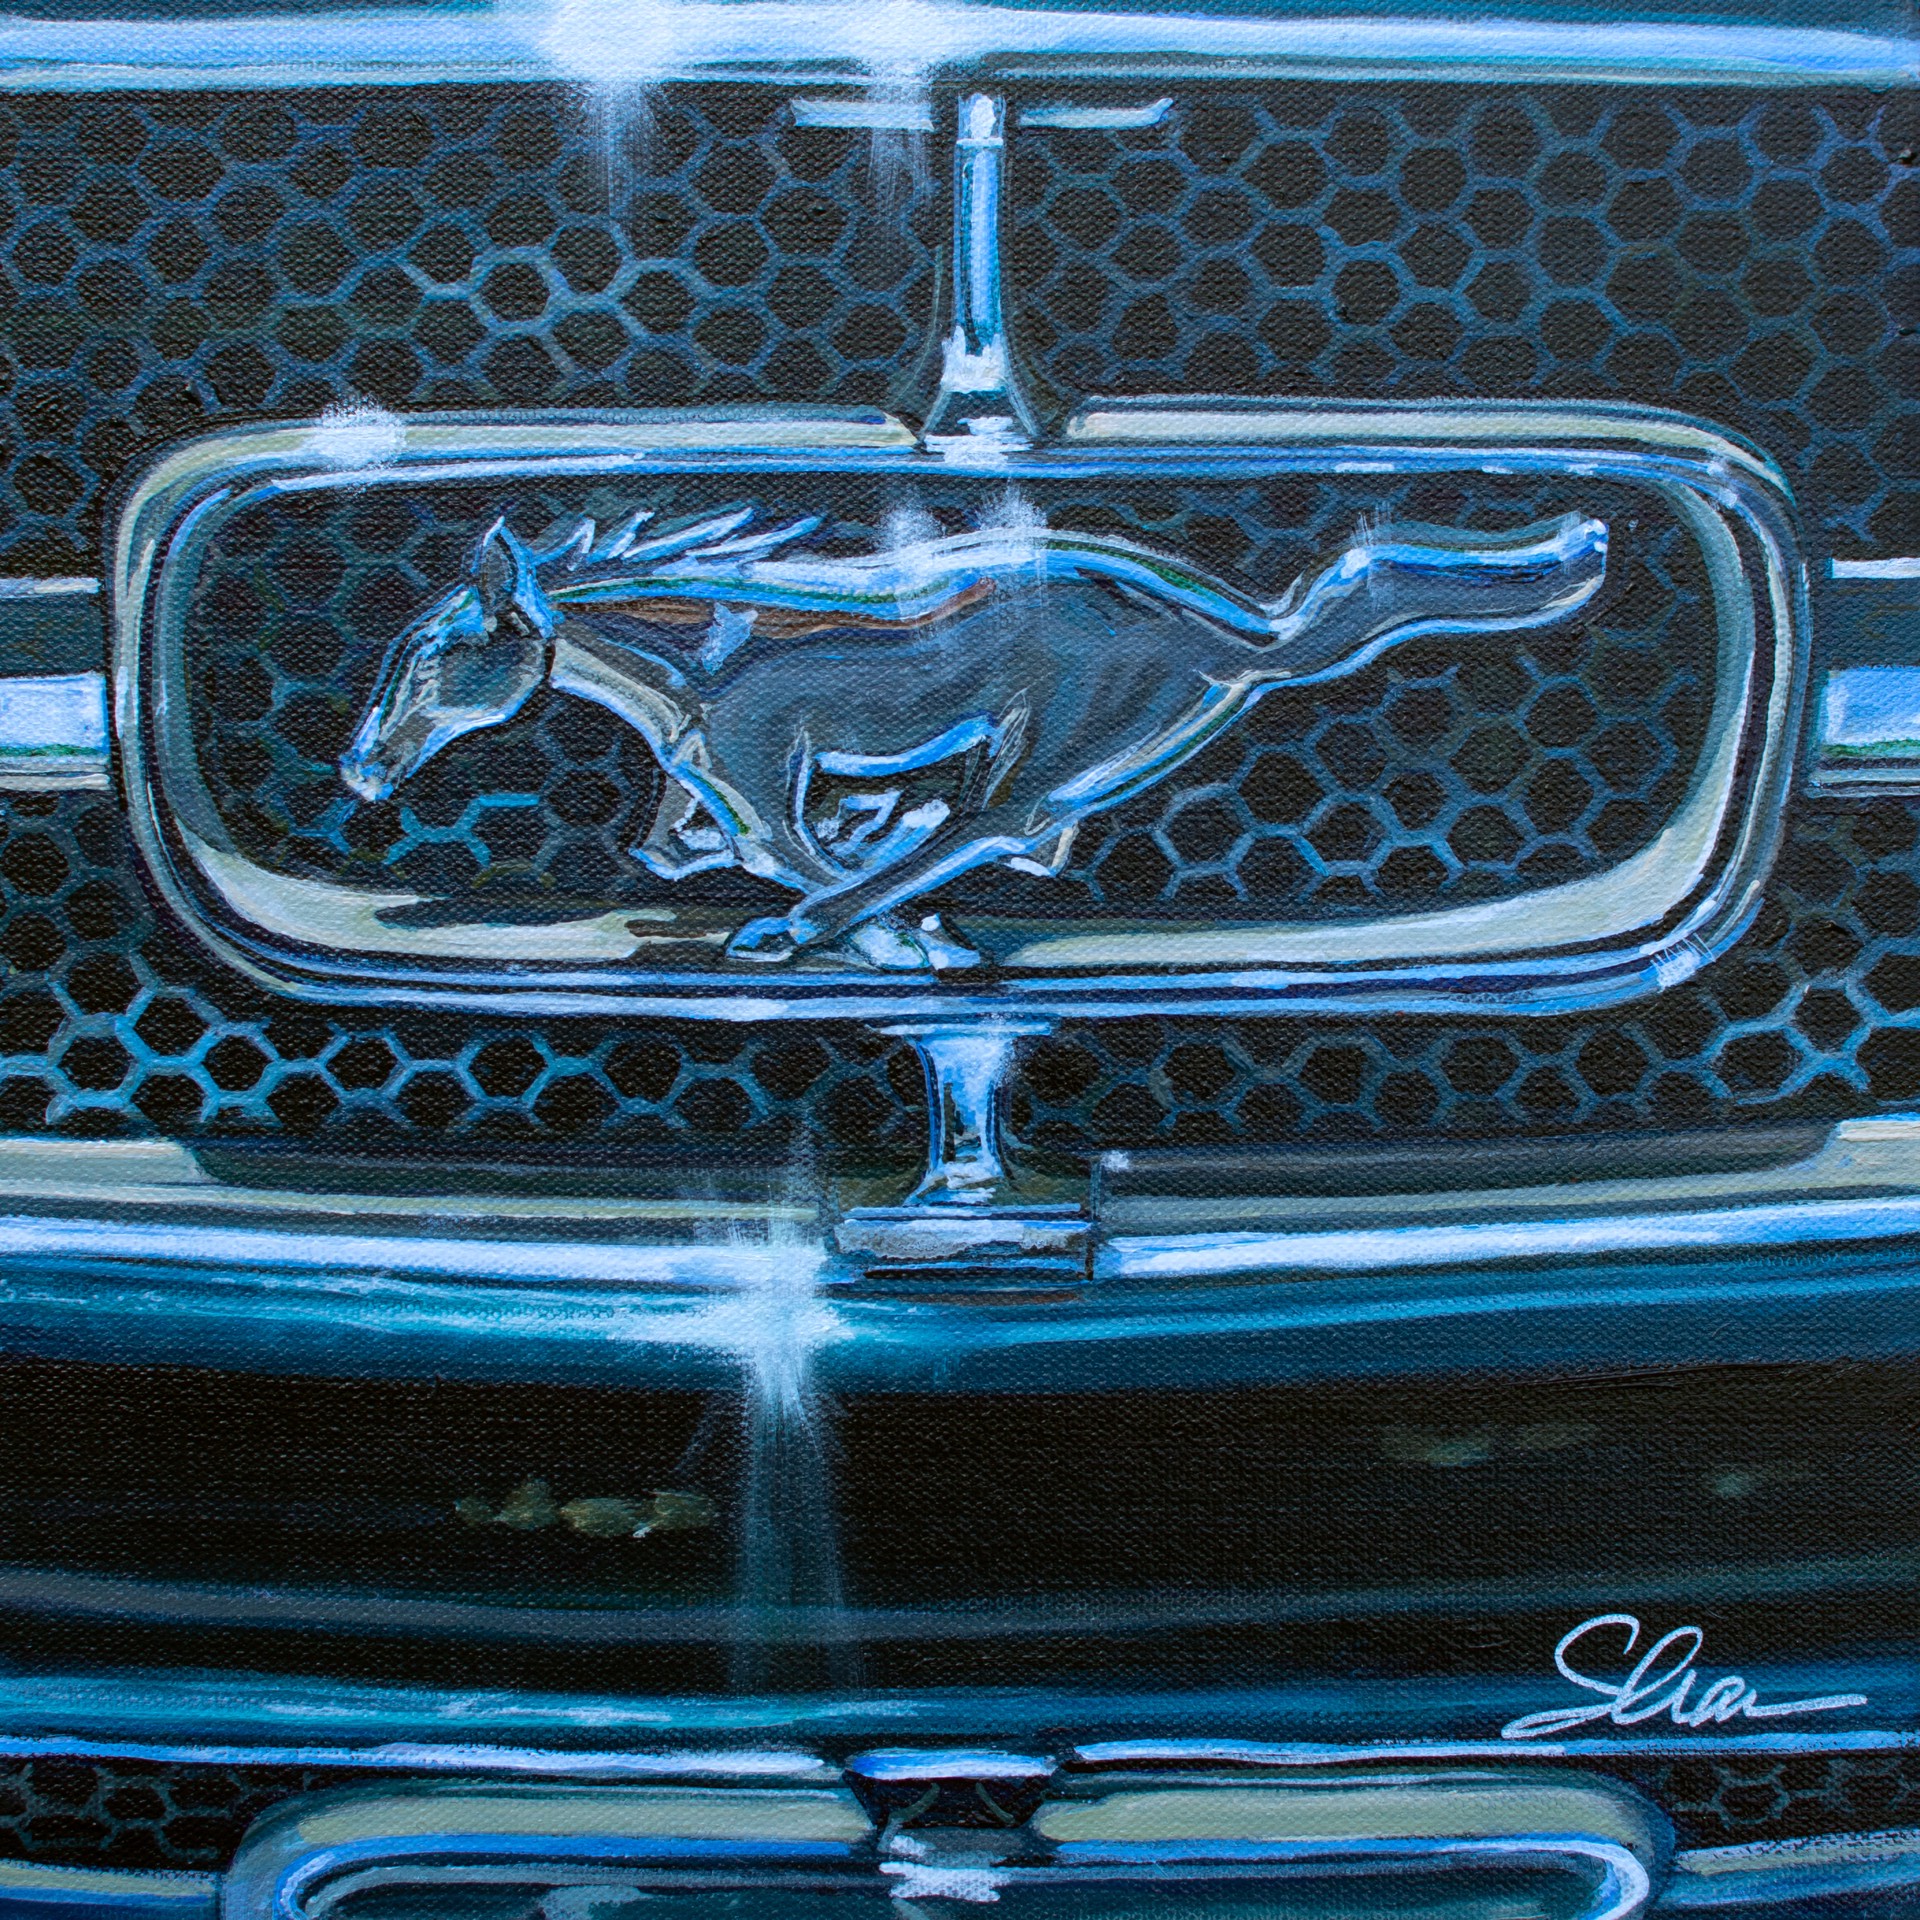 1965 Ford Mustang Grill - Dynasty Green by Shan Fannin